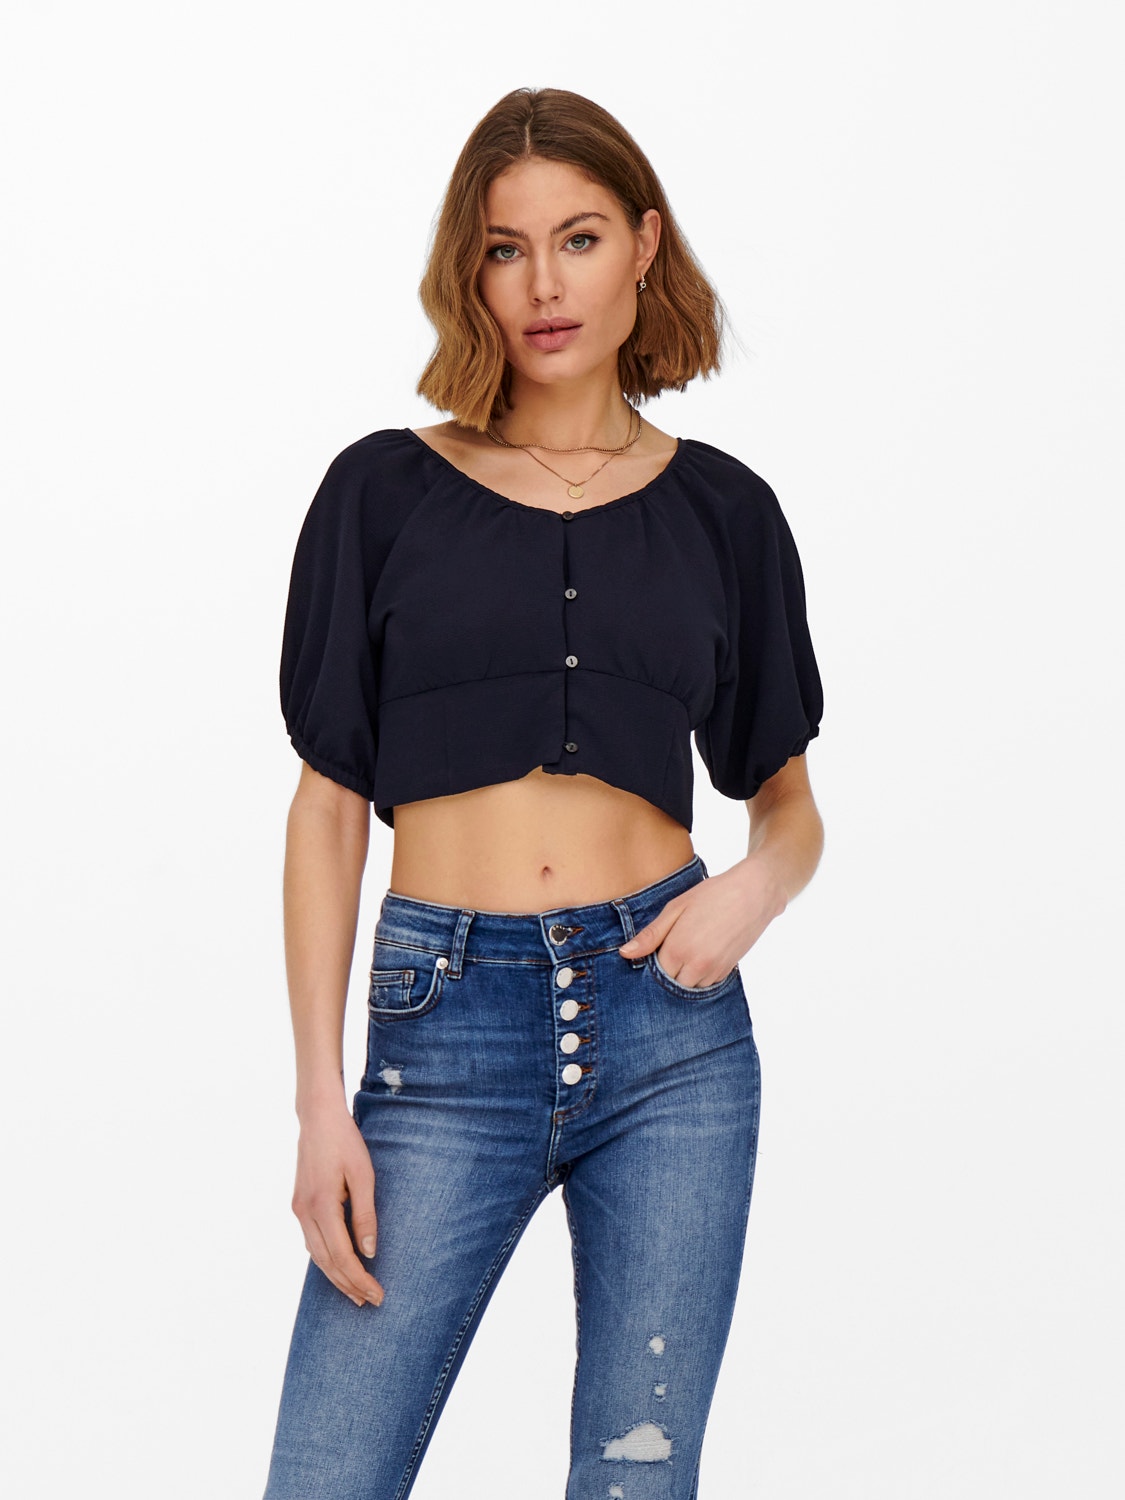 ONLY Tight Fit V-Neck Elasticated cuffs Top -Night Sky - 15248610